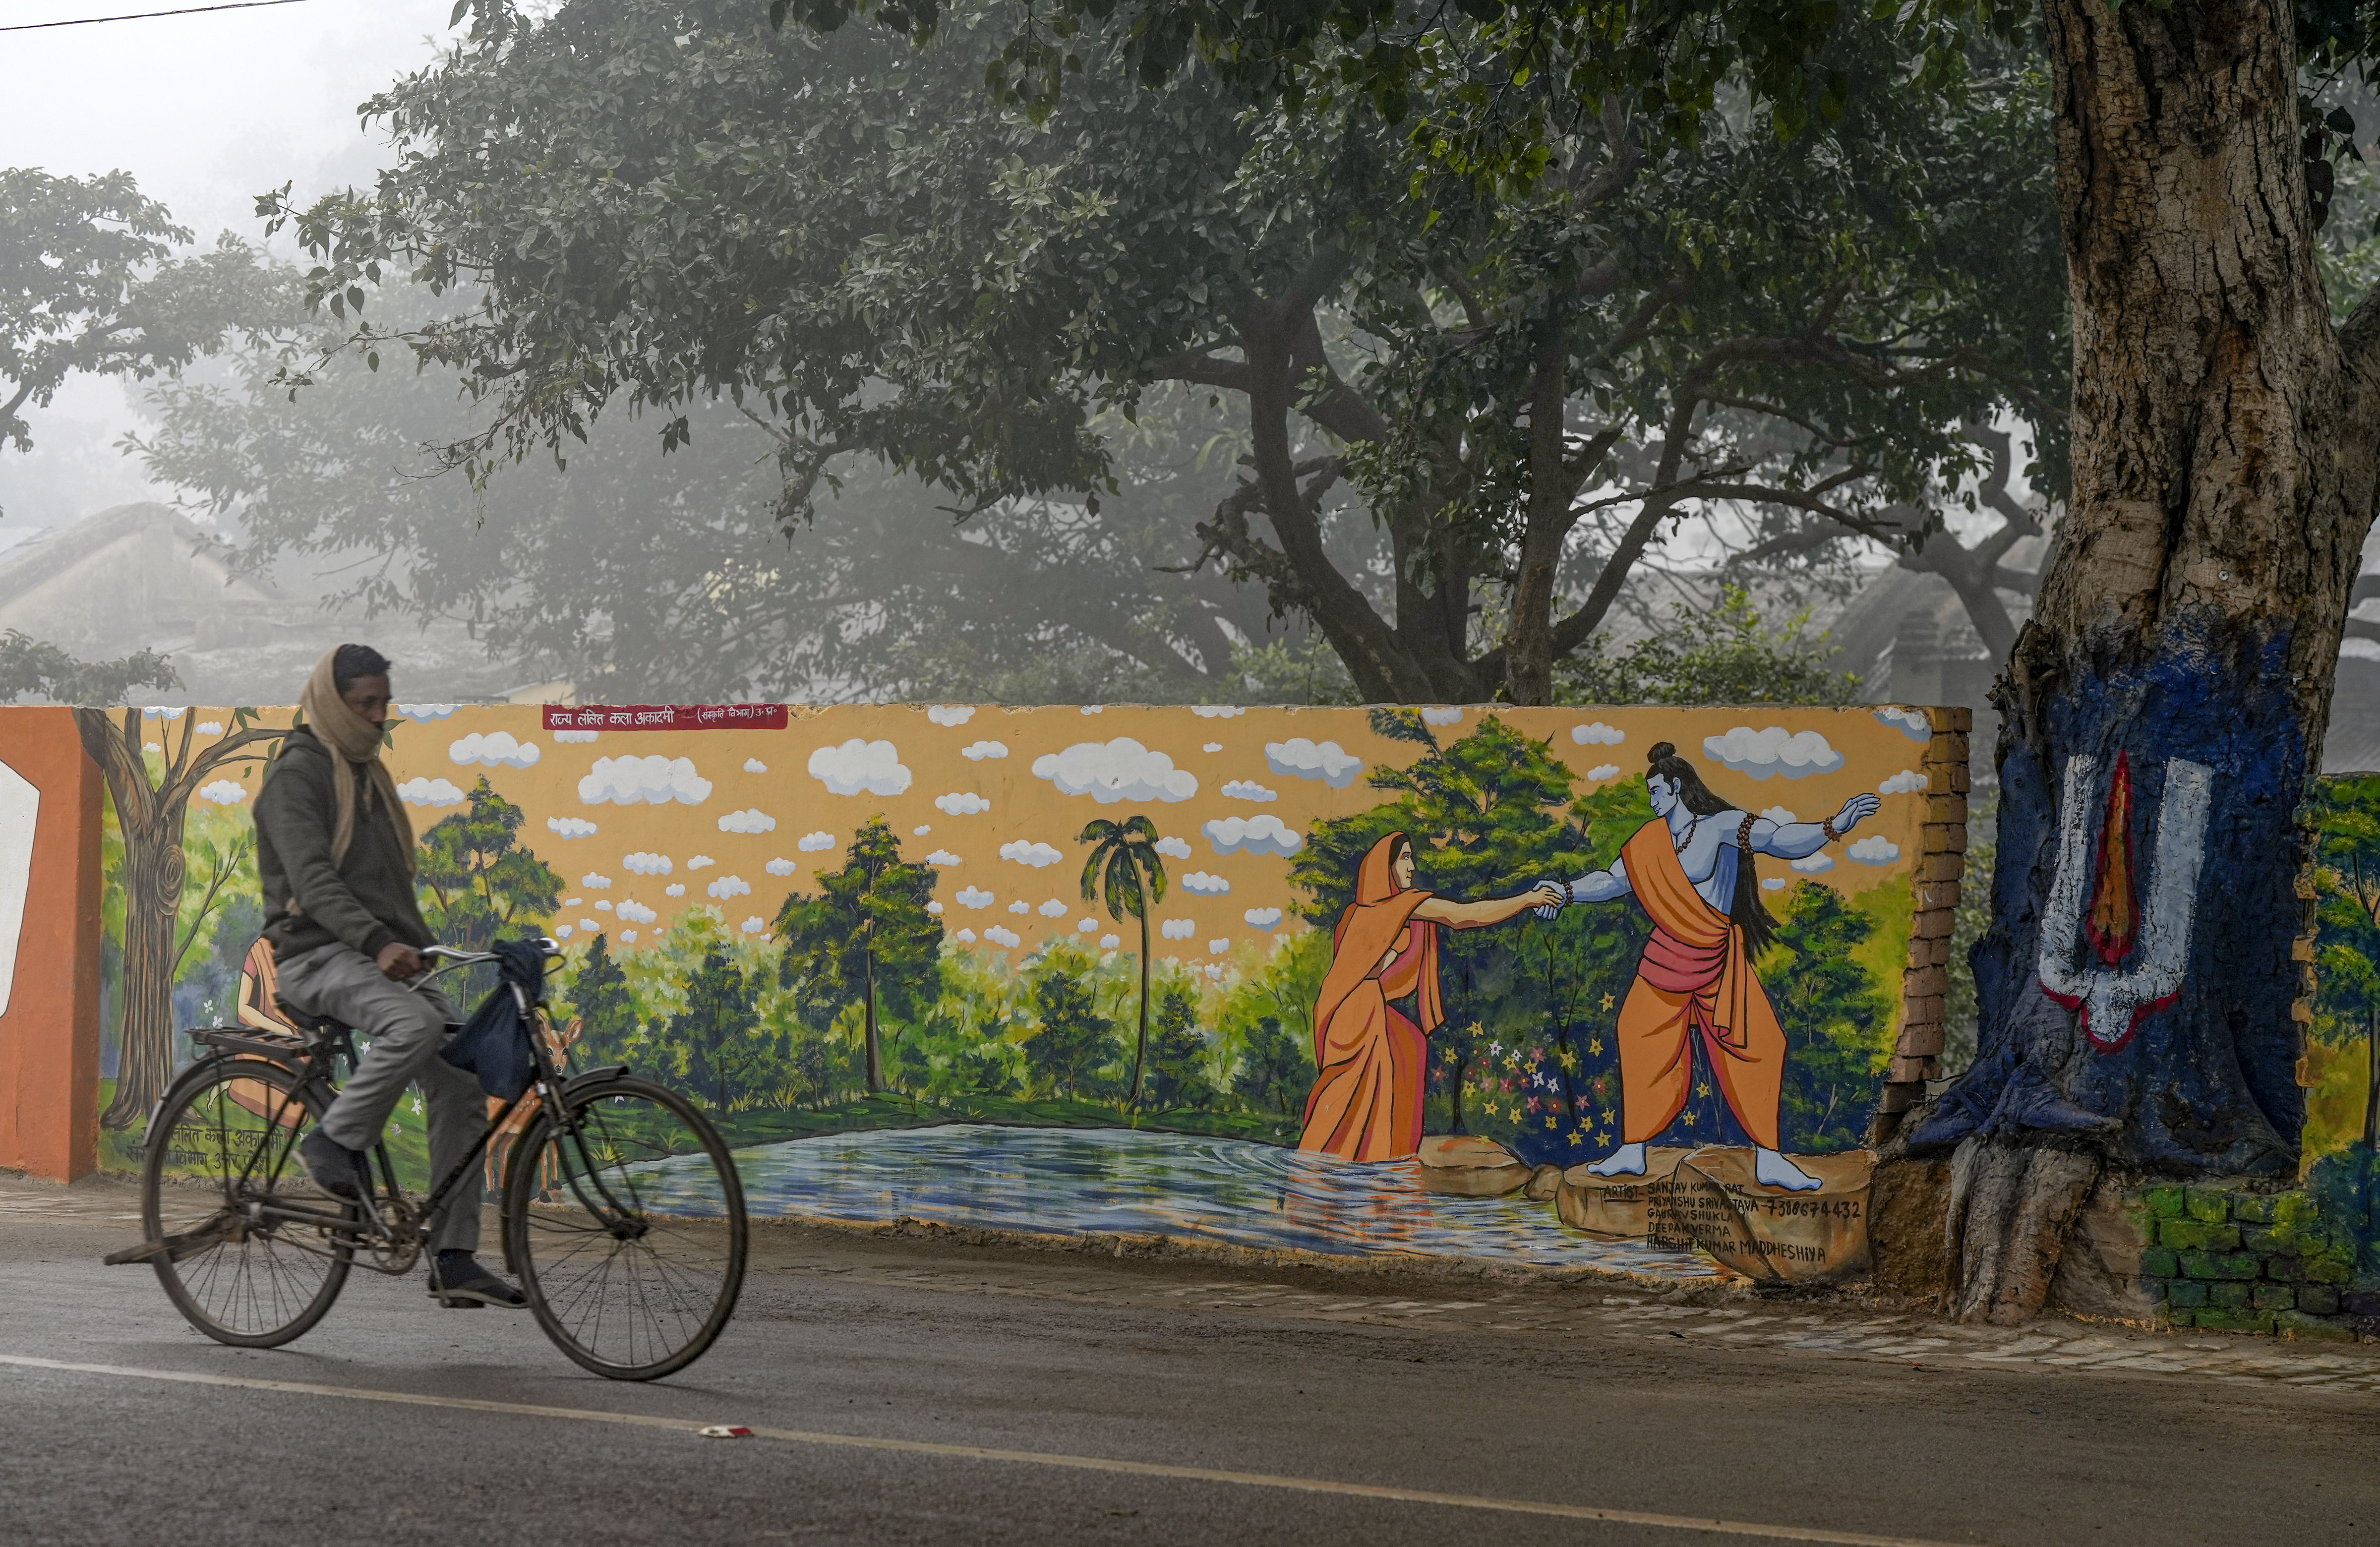 Murals depicting Lord Ram And Sita adorn the walls of Ram Path (Image Source: PTI)